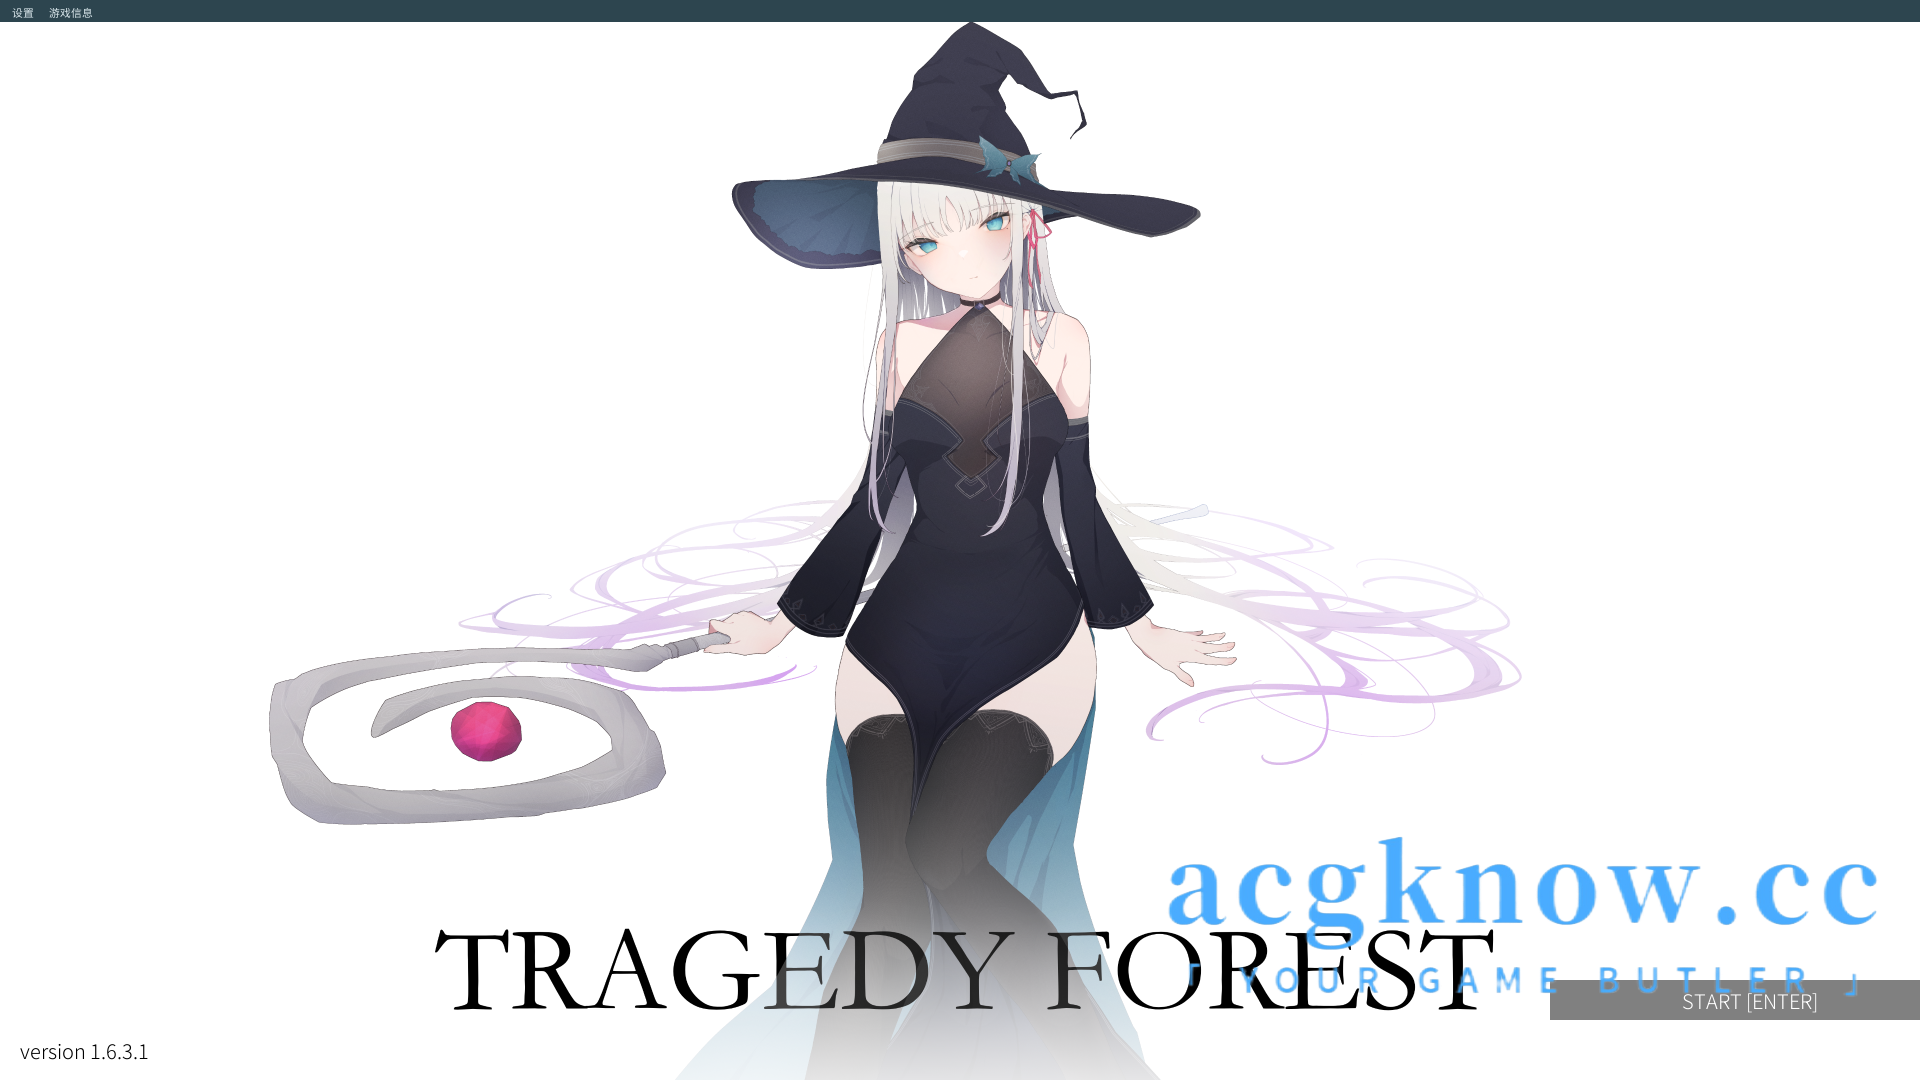 [PC][ACT/官中/动态]悲剧之森 TRAGEDY FOREST Ver1.6.3.1 官方中文版【800M】-acgknow